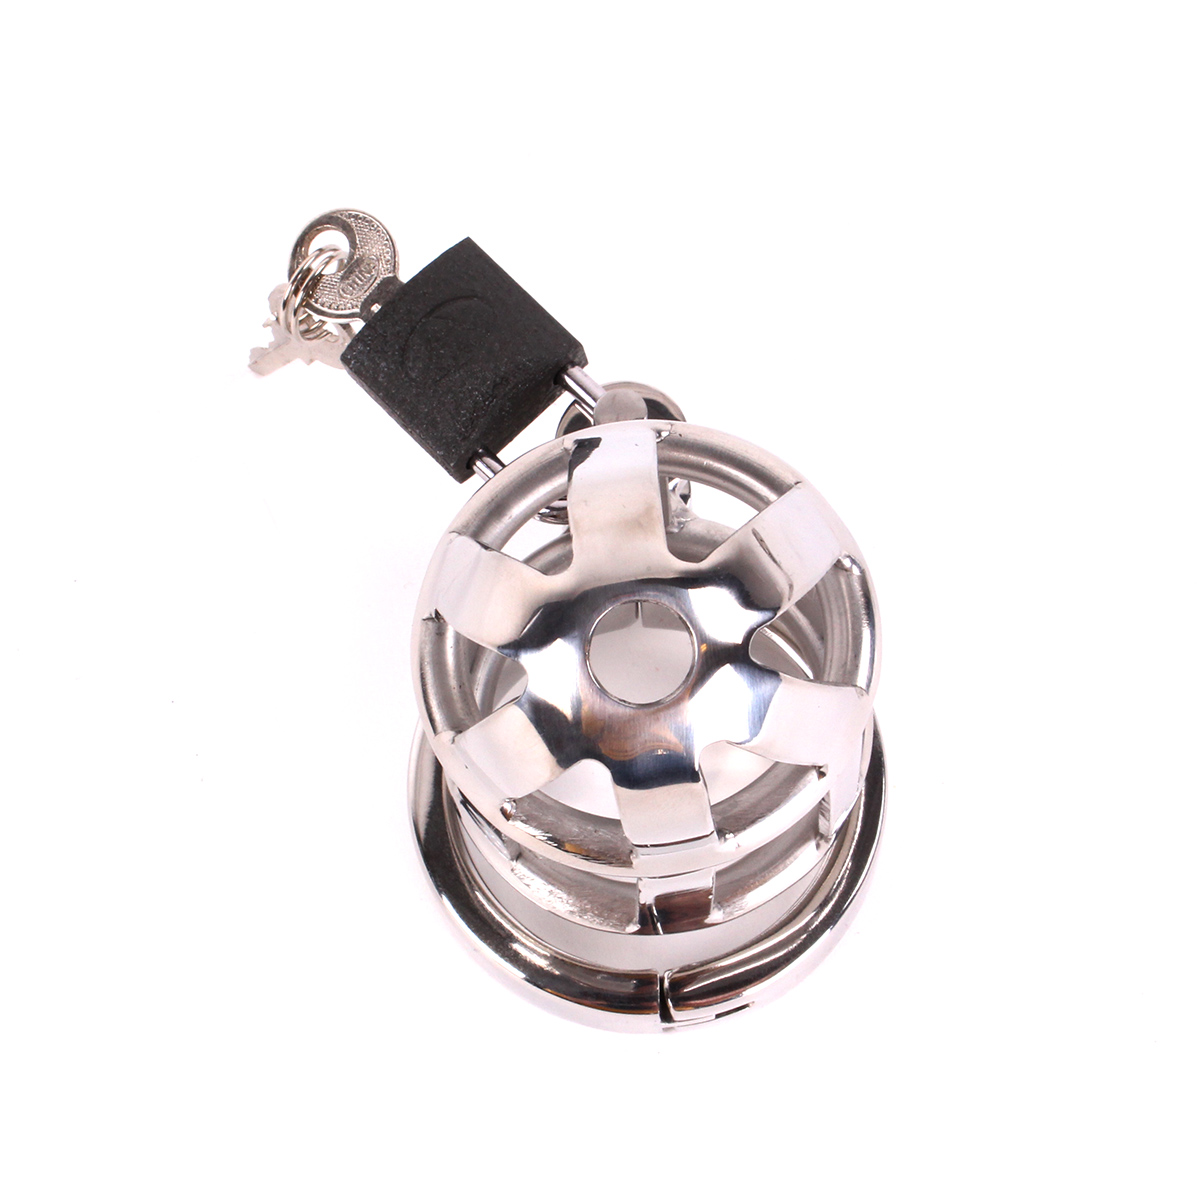 Chastity-Cage-DeLuxe-6.5-cm-OPR-277025-4